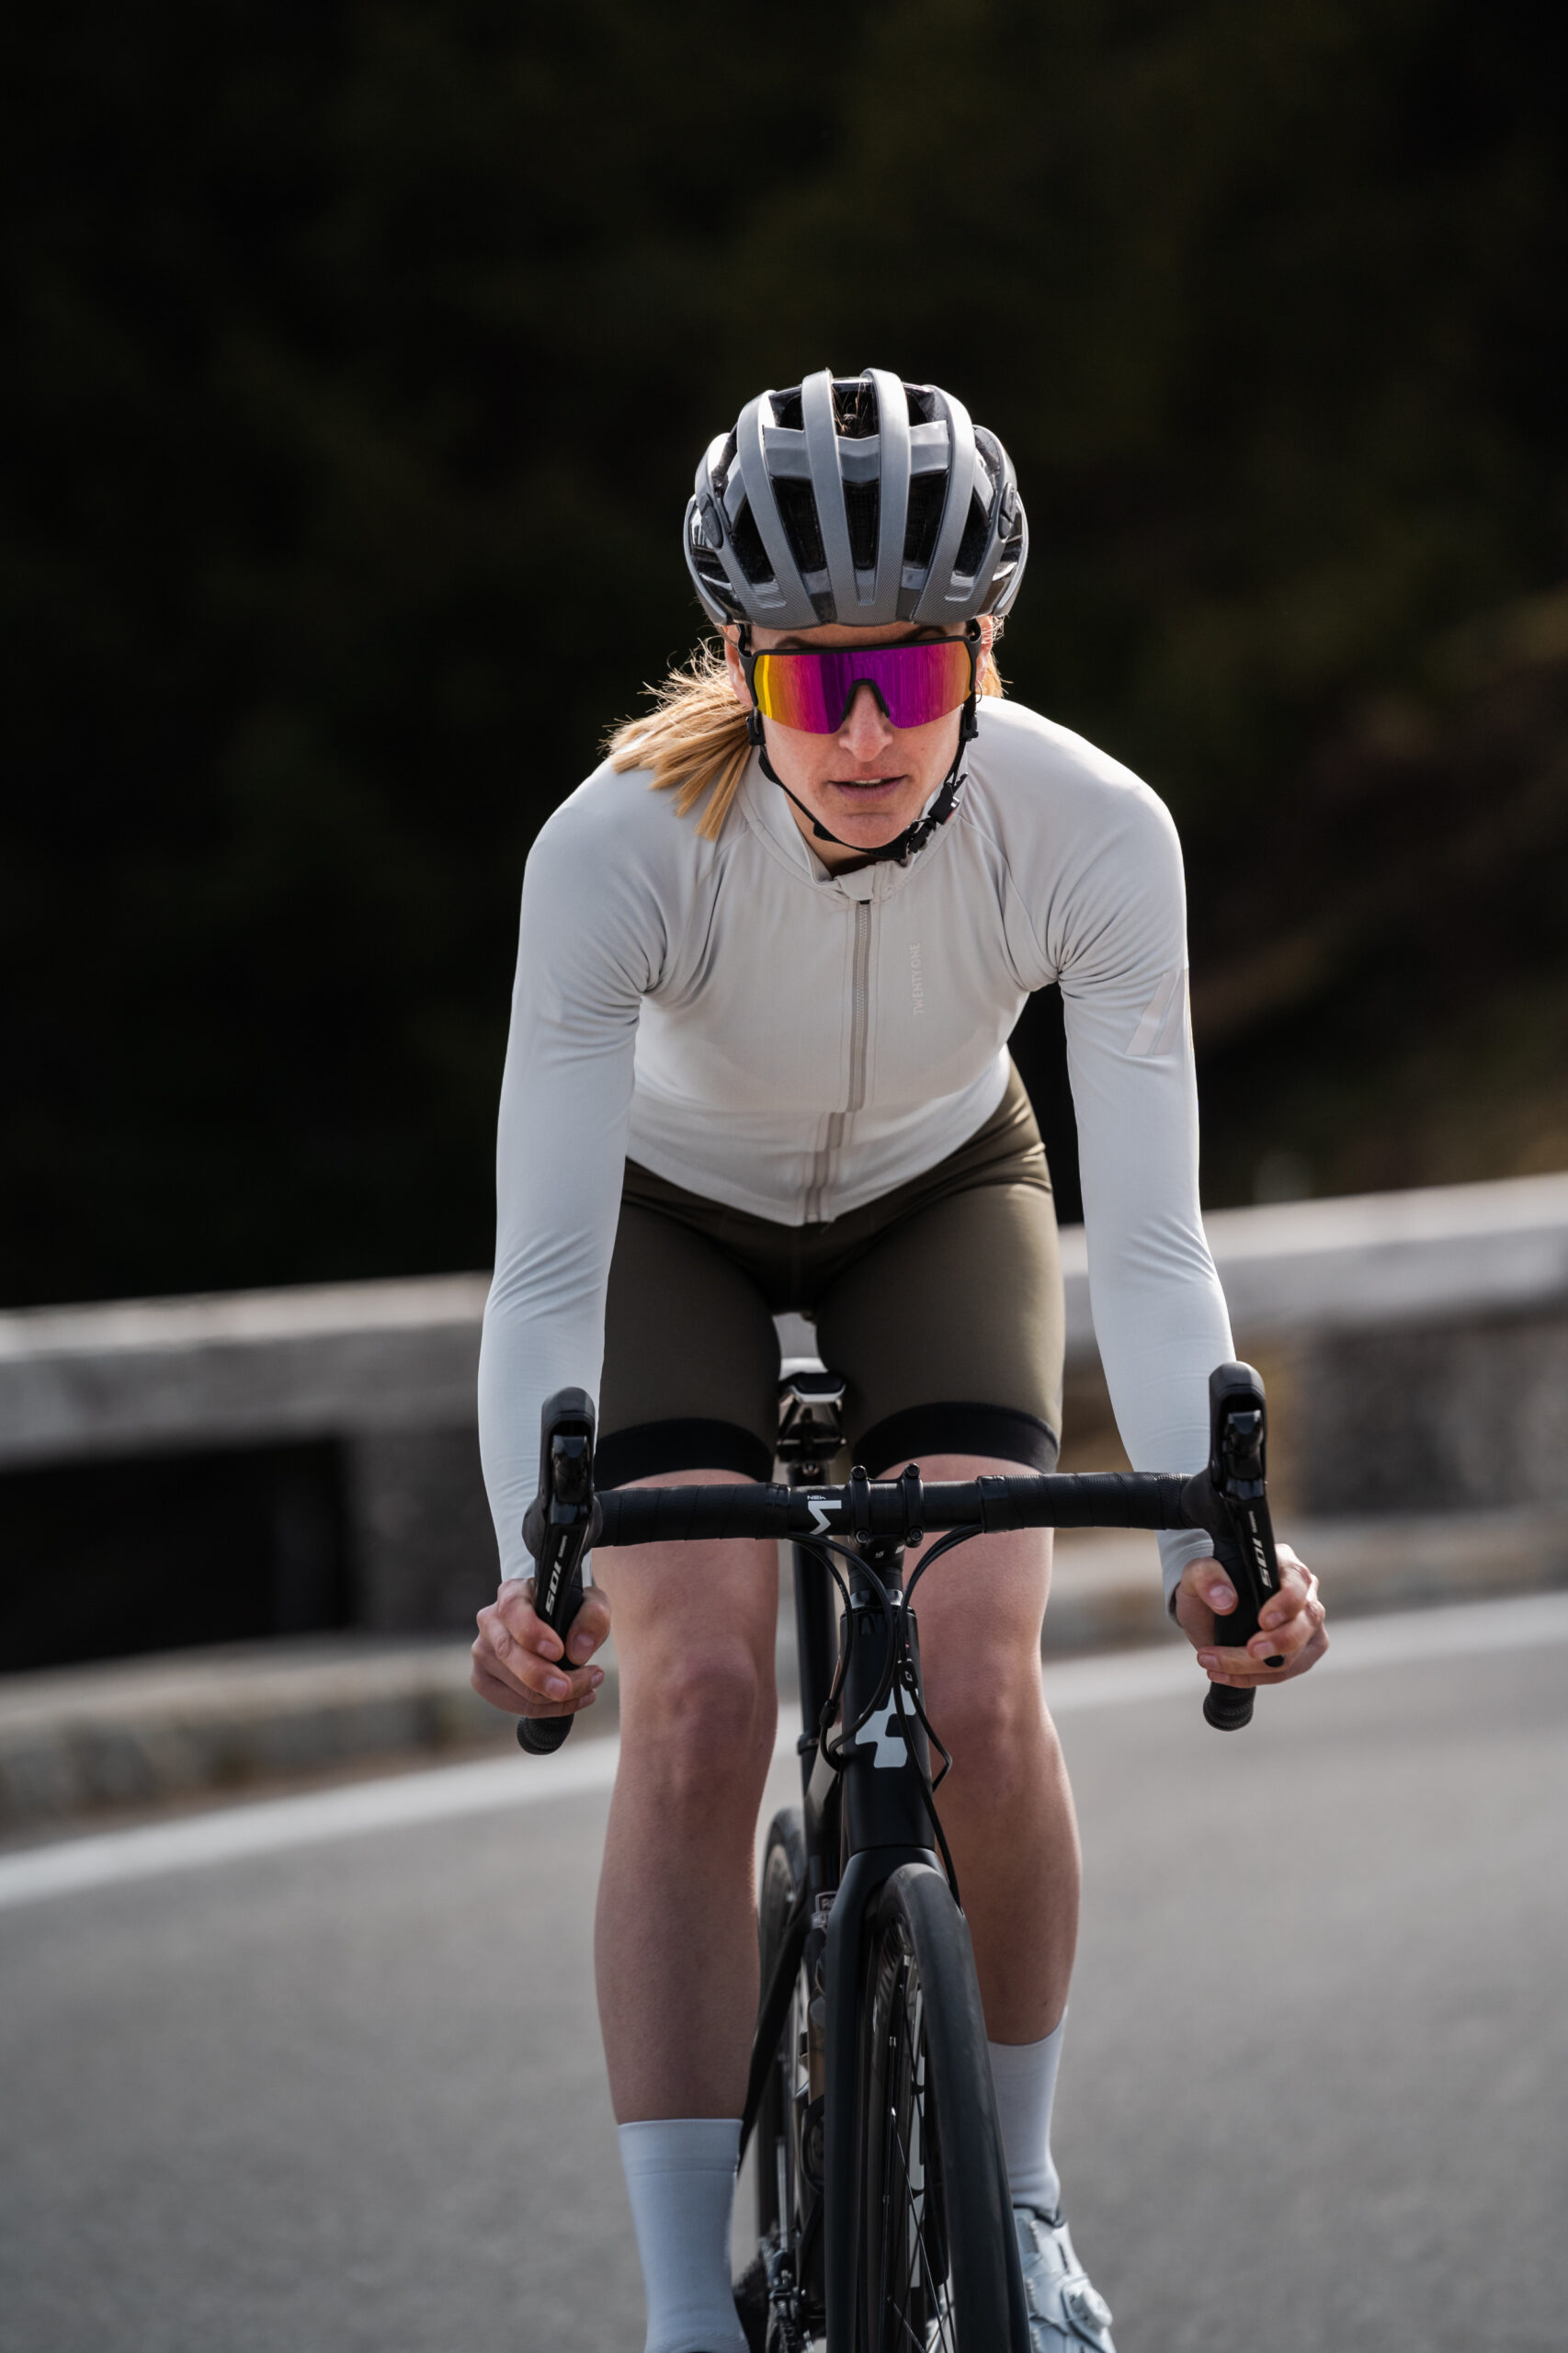 Women cyclist is riding a bicycle with the helmet and sports sunglasses